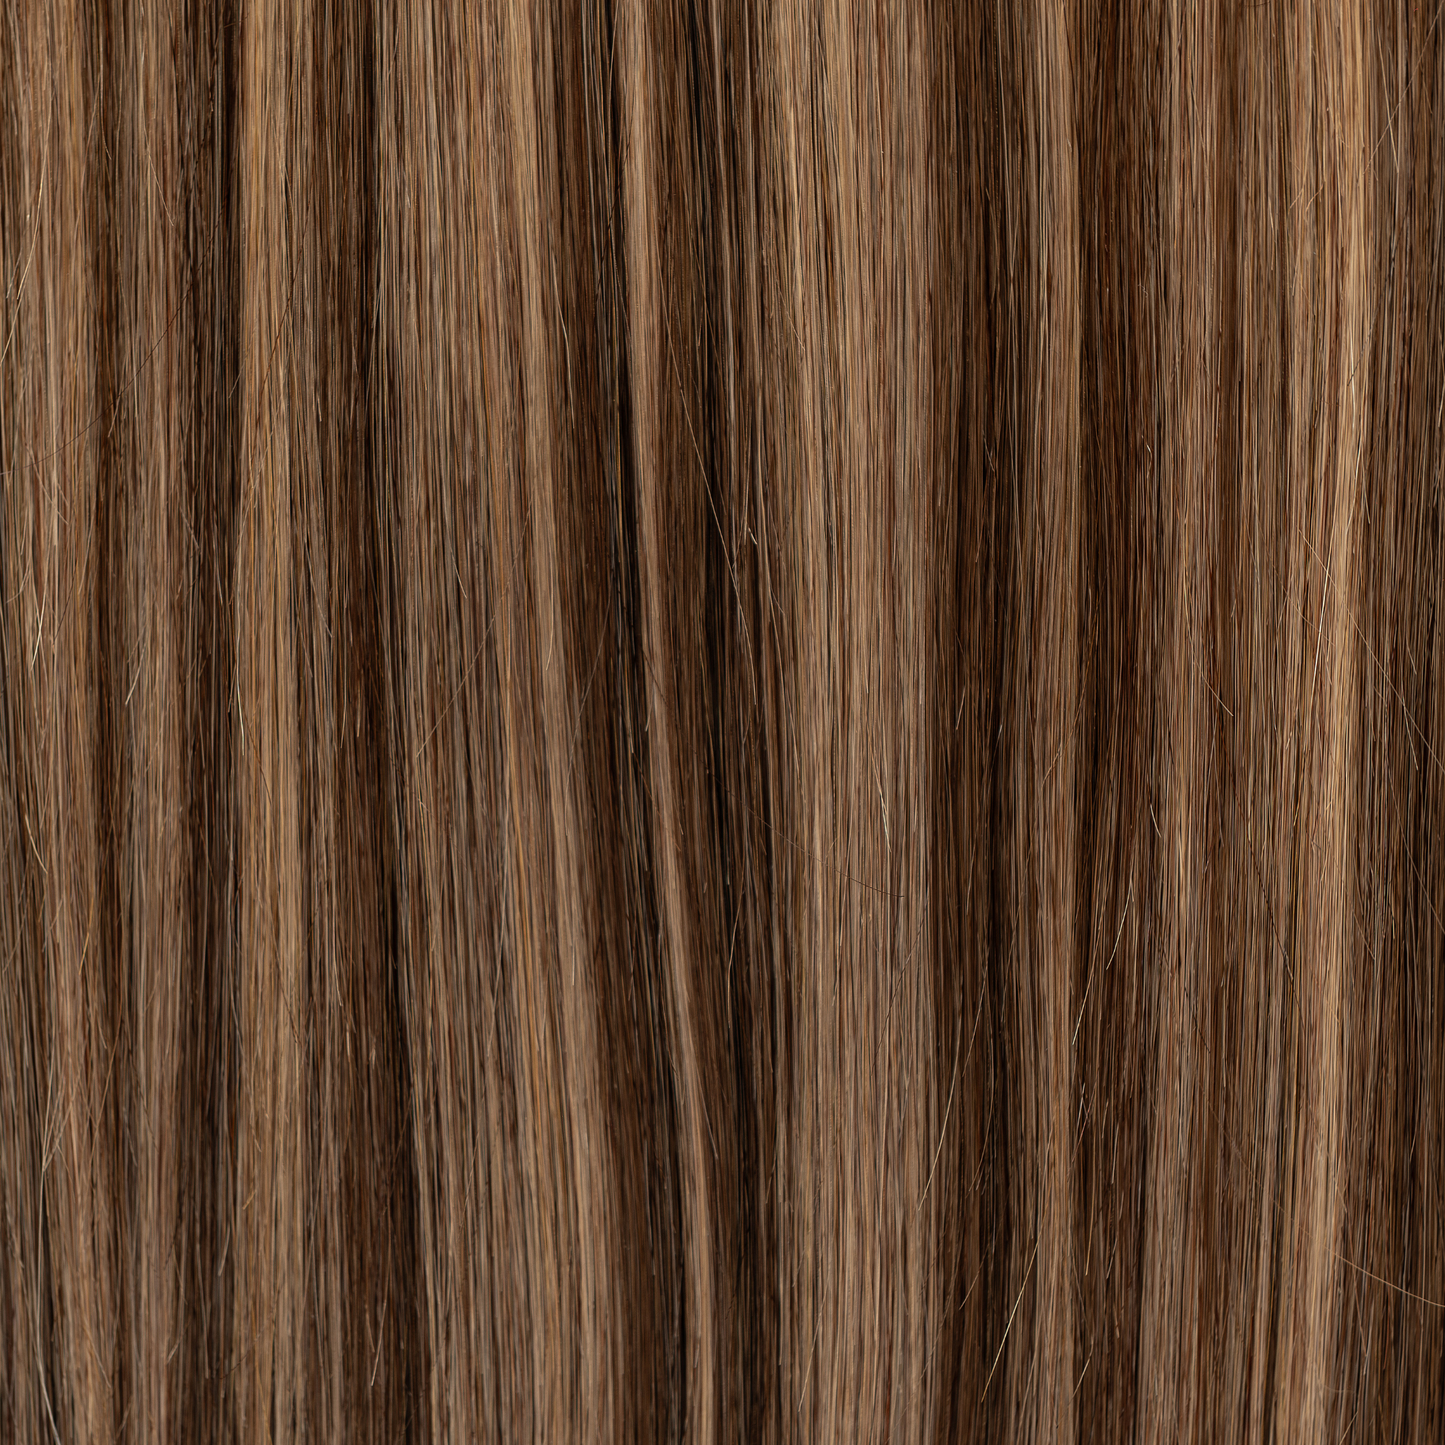 16" Clip-In Light Brown Balayage Hair Extensions